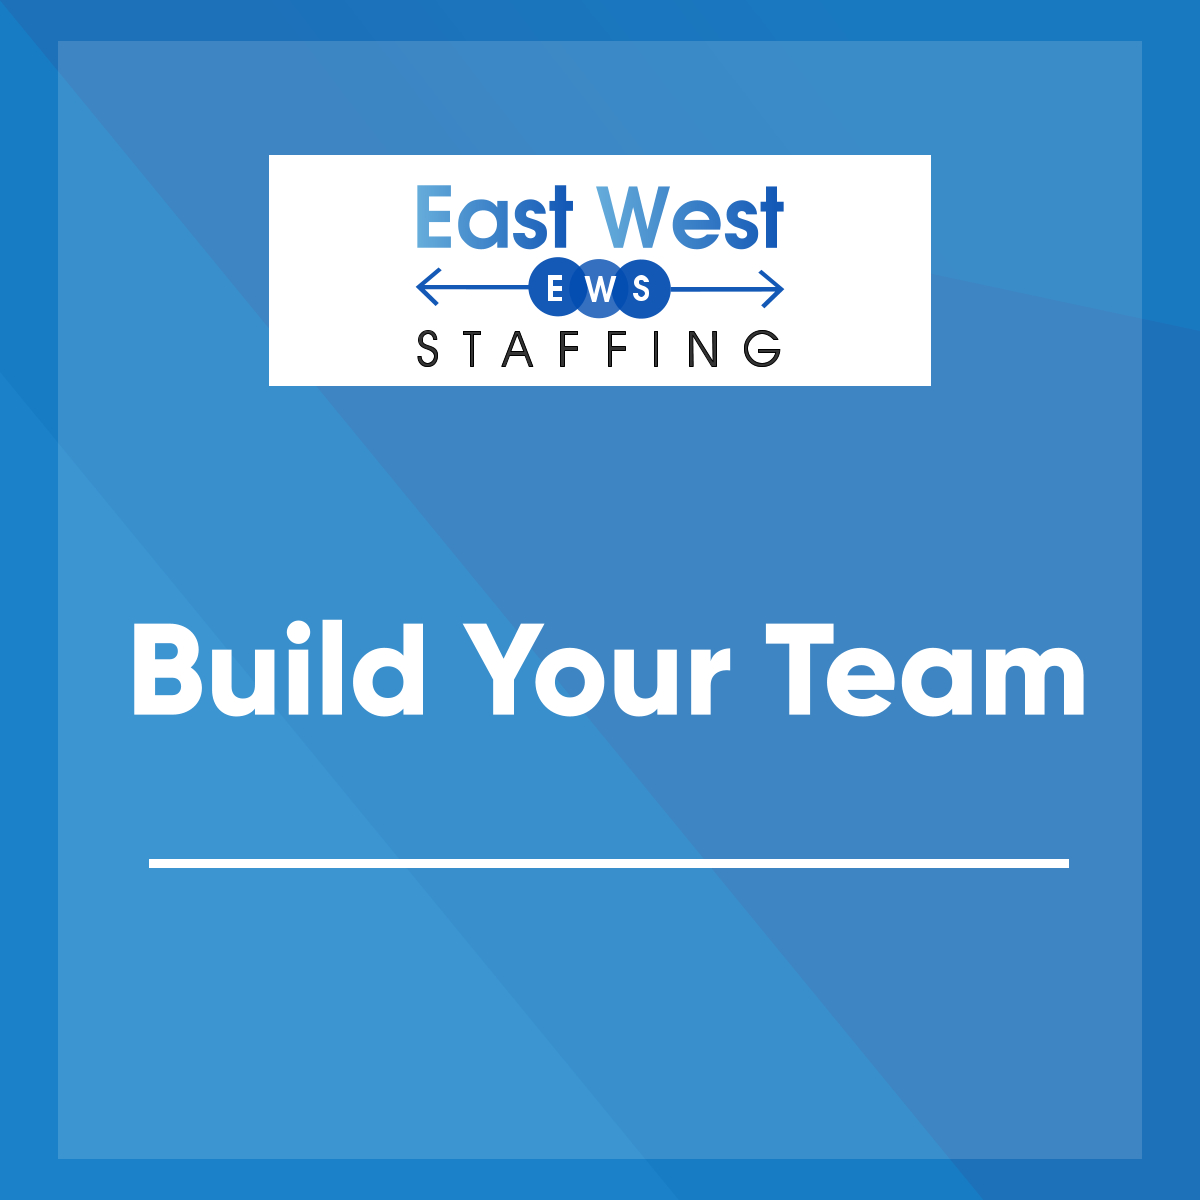 Building a solid team is essential to the success of any technology company. Let East West Staffing help you achieve your company objectives by providing the best possible recruitment solutions.

#TelecommunicationsStaffing #BuildingTeam #RoswellGA